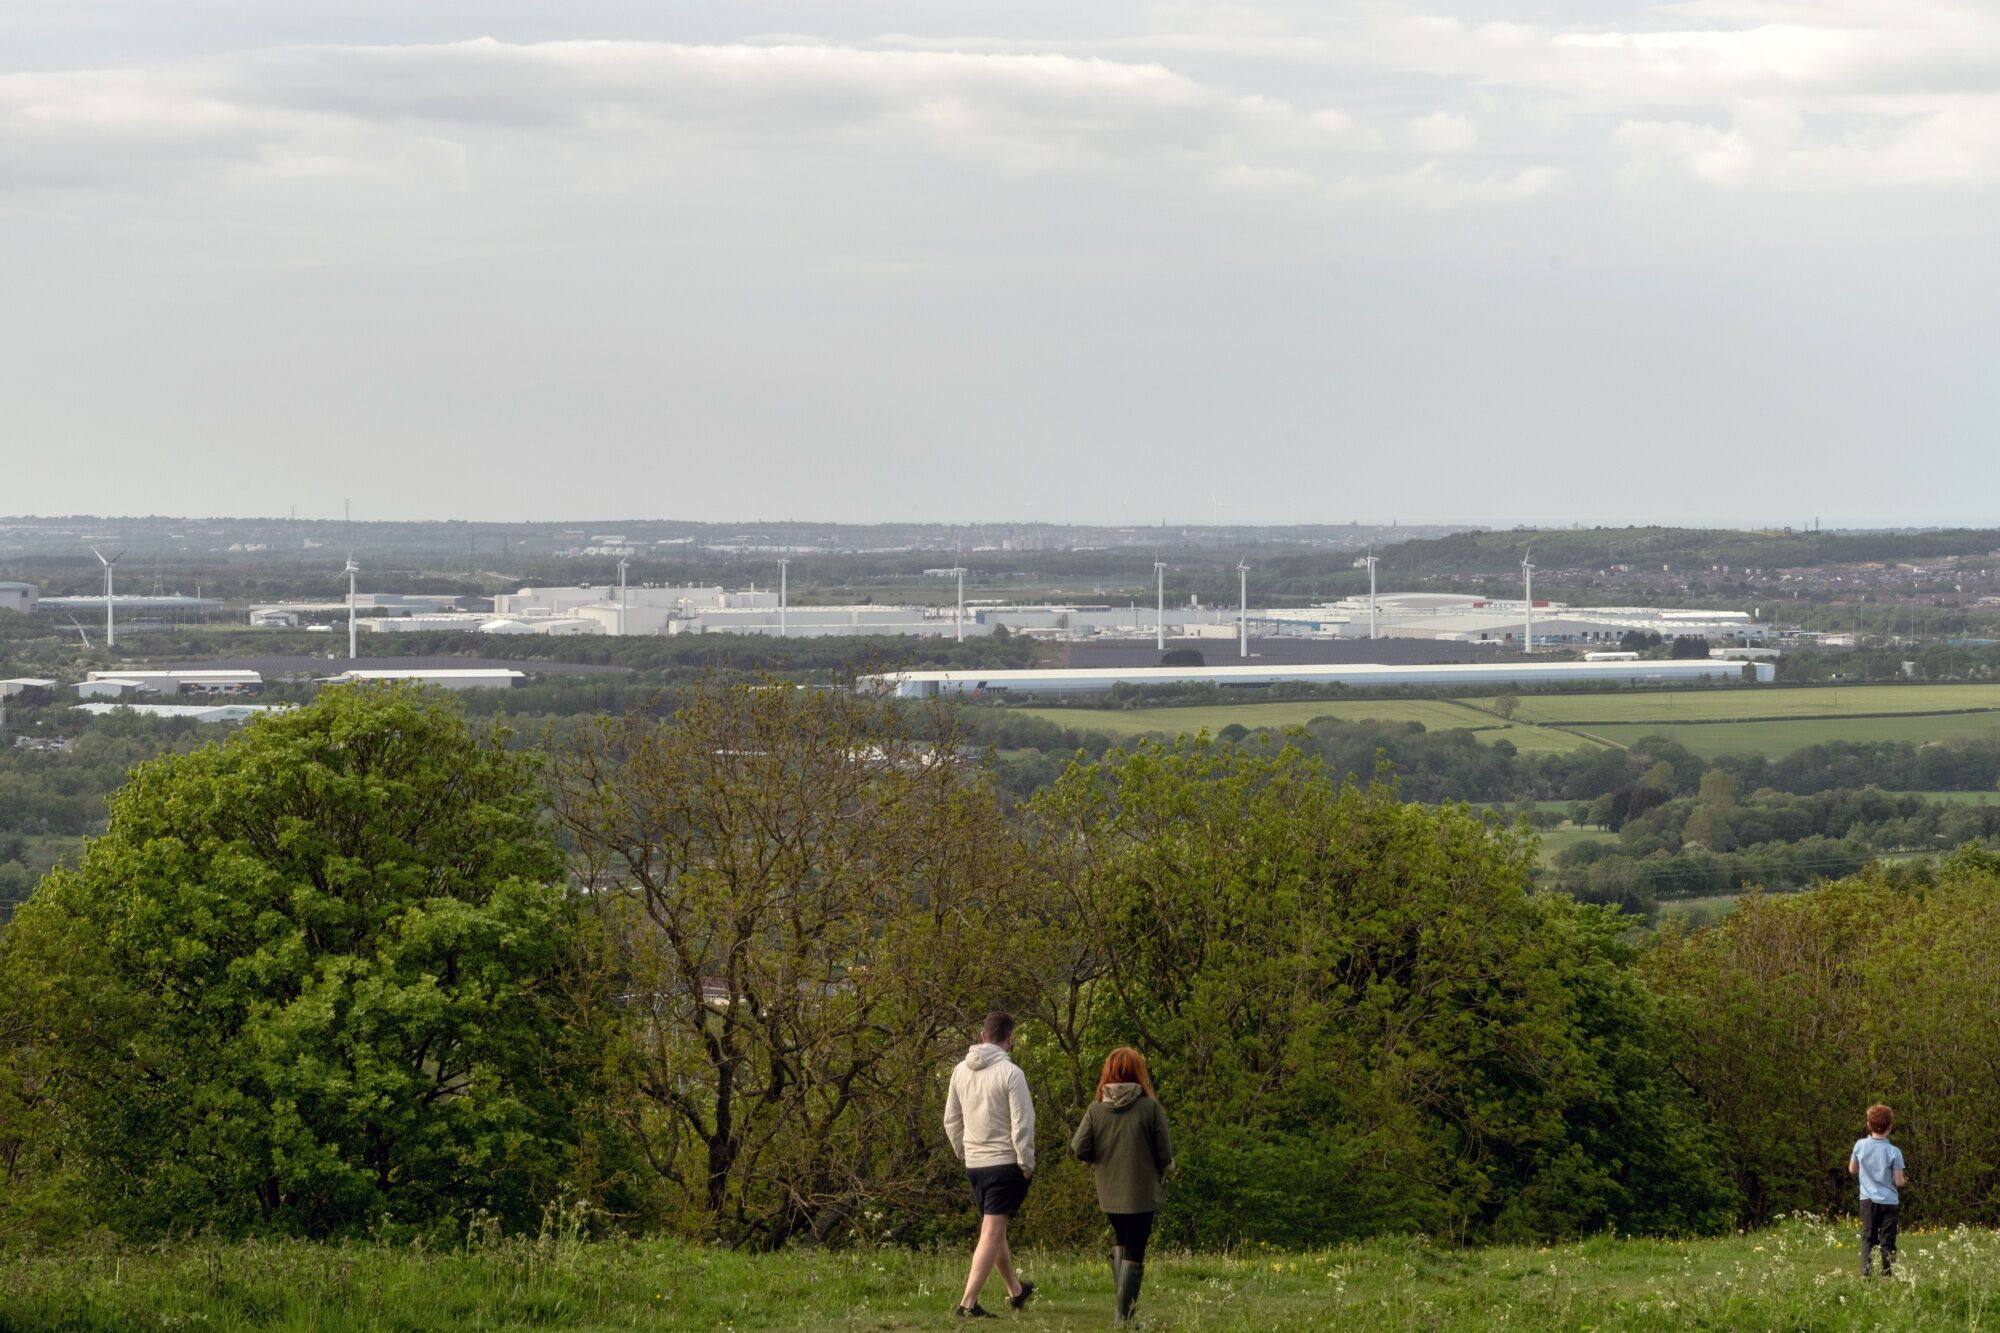 A view of the Nissan car plant from Penshaw Hill in Sunderland on May 23. Although Britain’s economic underperformance is often blamed on Brexit, the real malaise lies in decades of underinvestment in industry. Photo: Bloomberg 